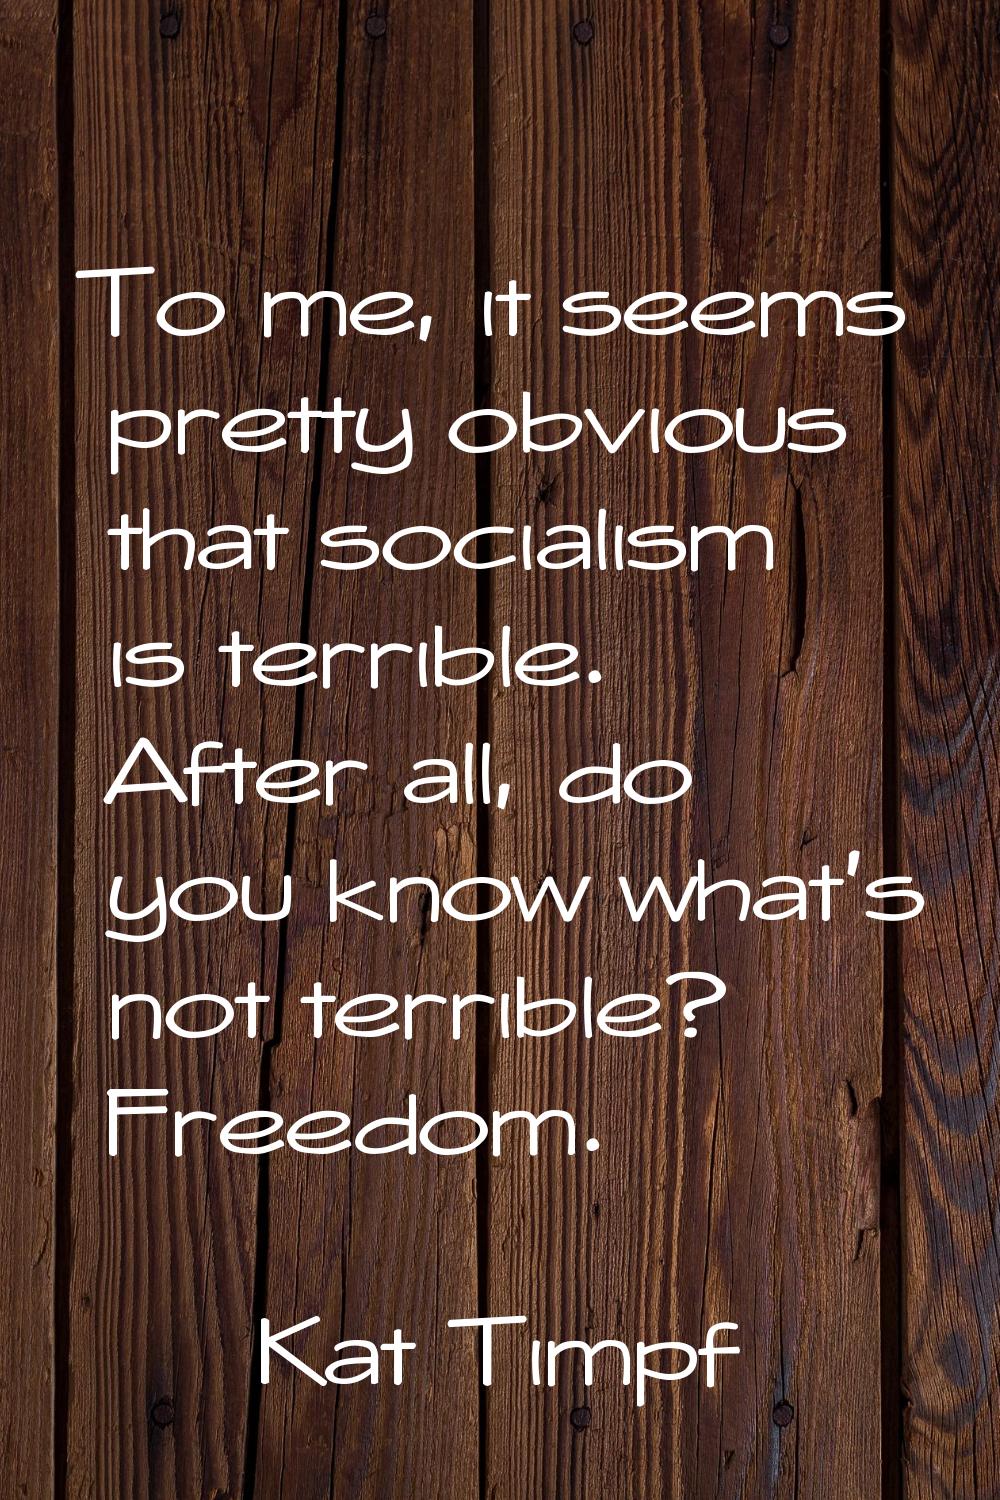 To me, it seems pretty obvious that socialism is terrible. After all, do you know what's not terrib